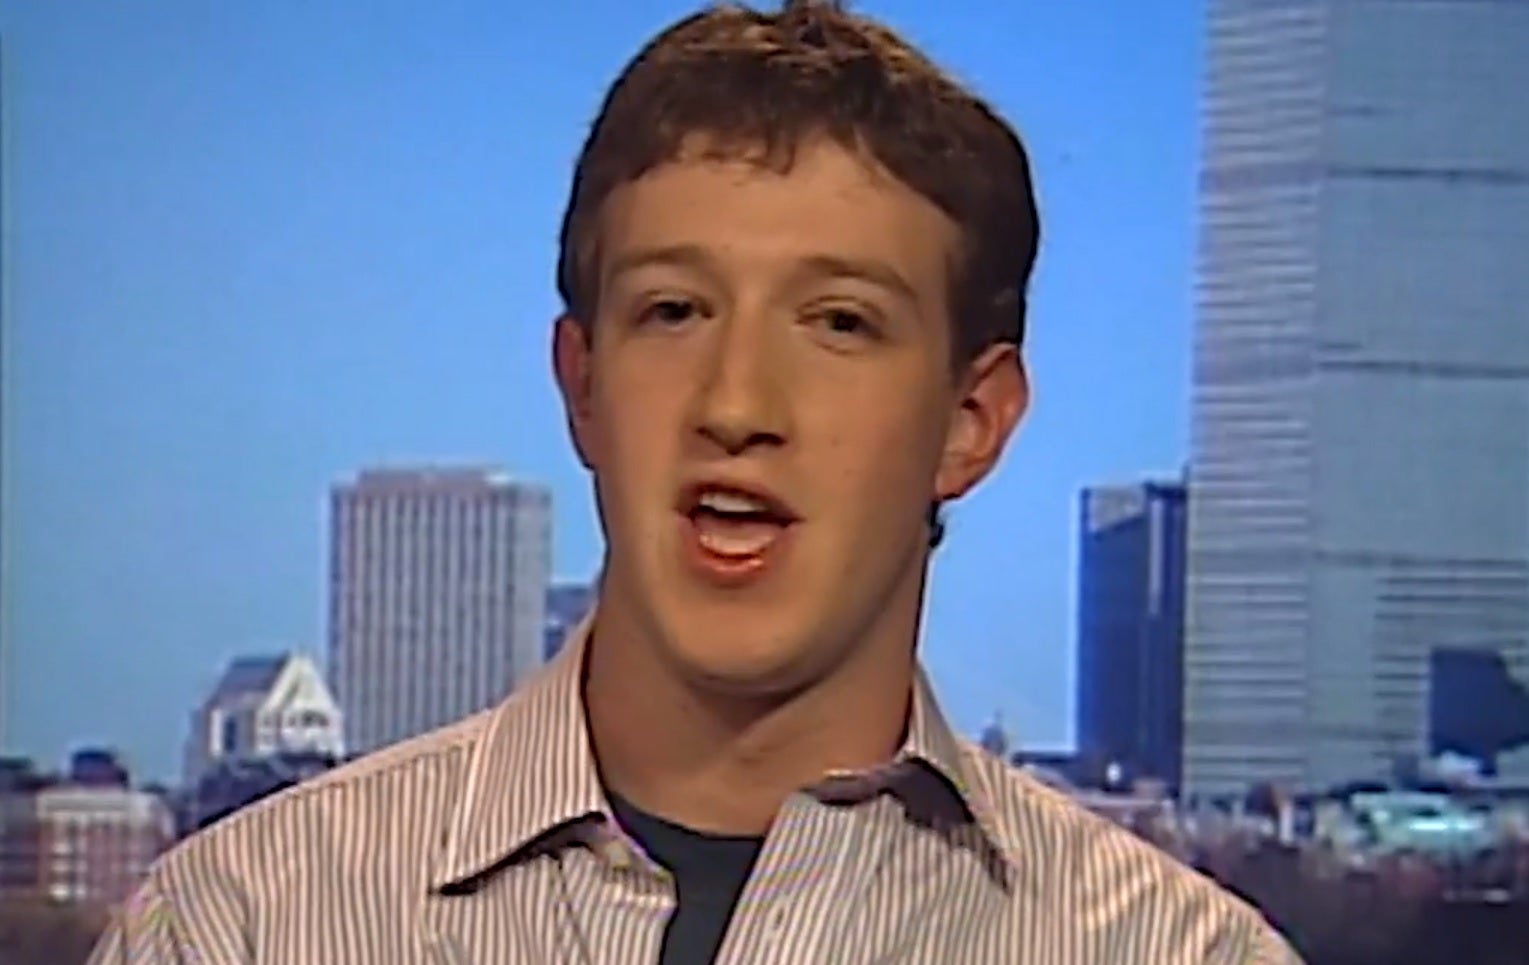 FACEBOOK AT 15: HOW THE SOCIAL NETWORK TOOK OVER THE INTERNET IN LESS THAN TWO DECADES 1